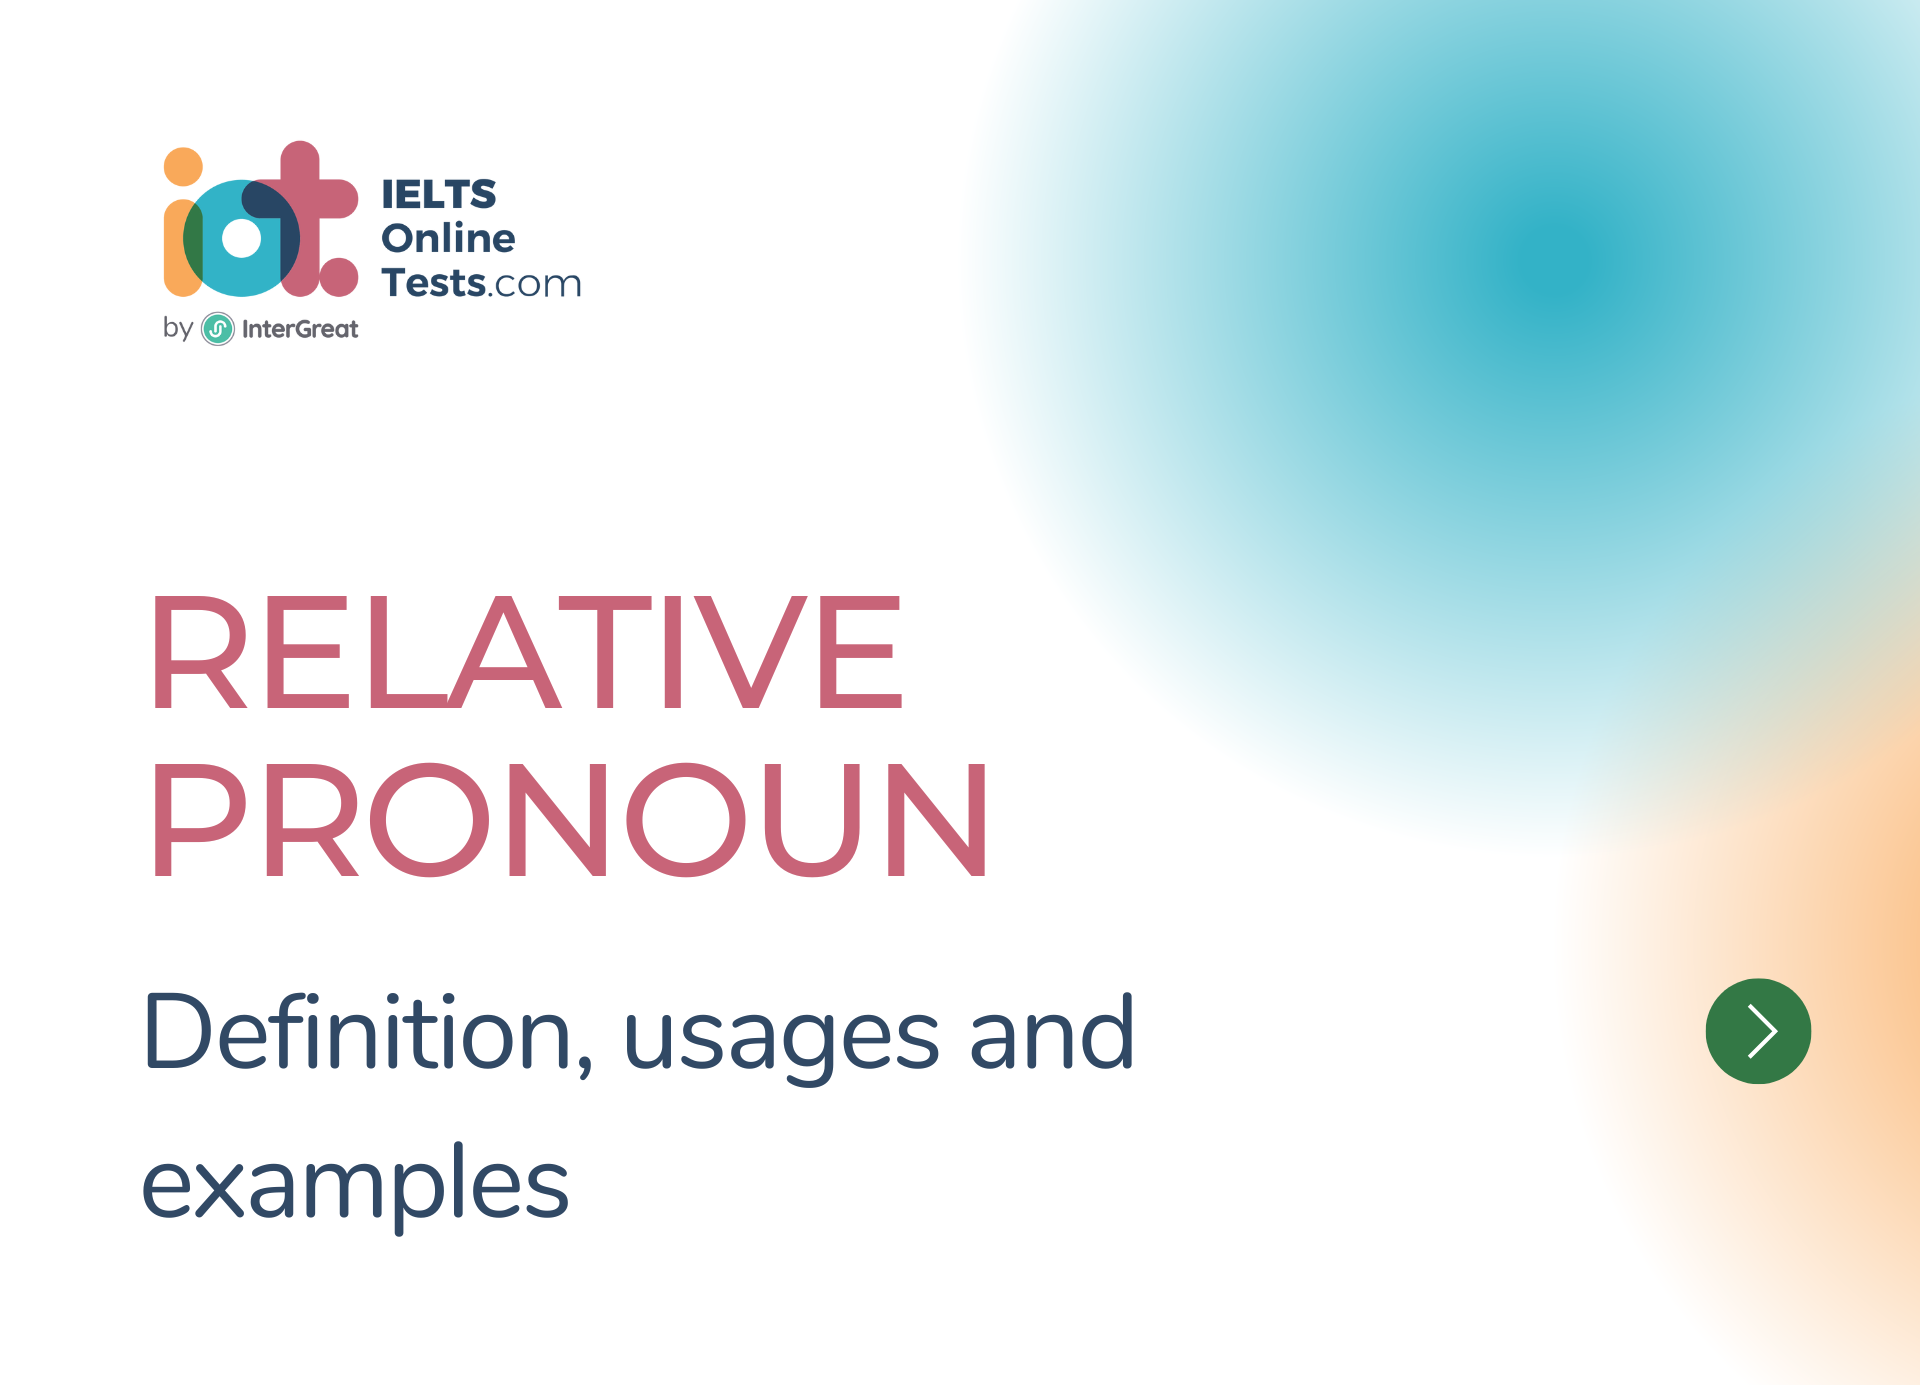 Relative pronoun definition and common examples